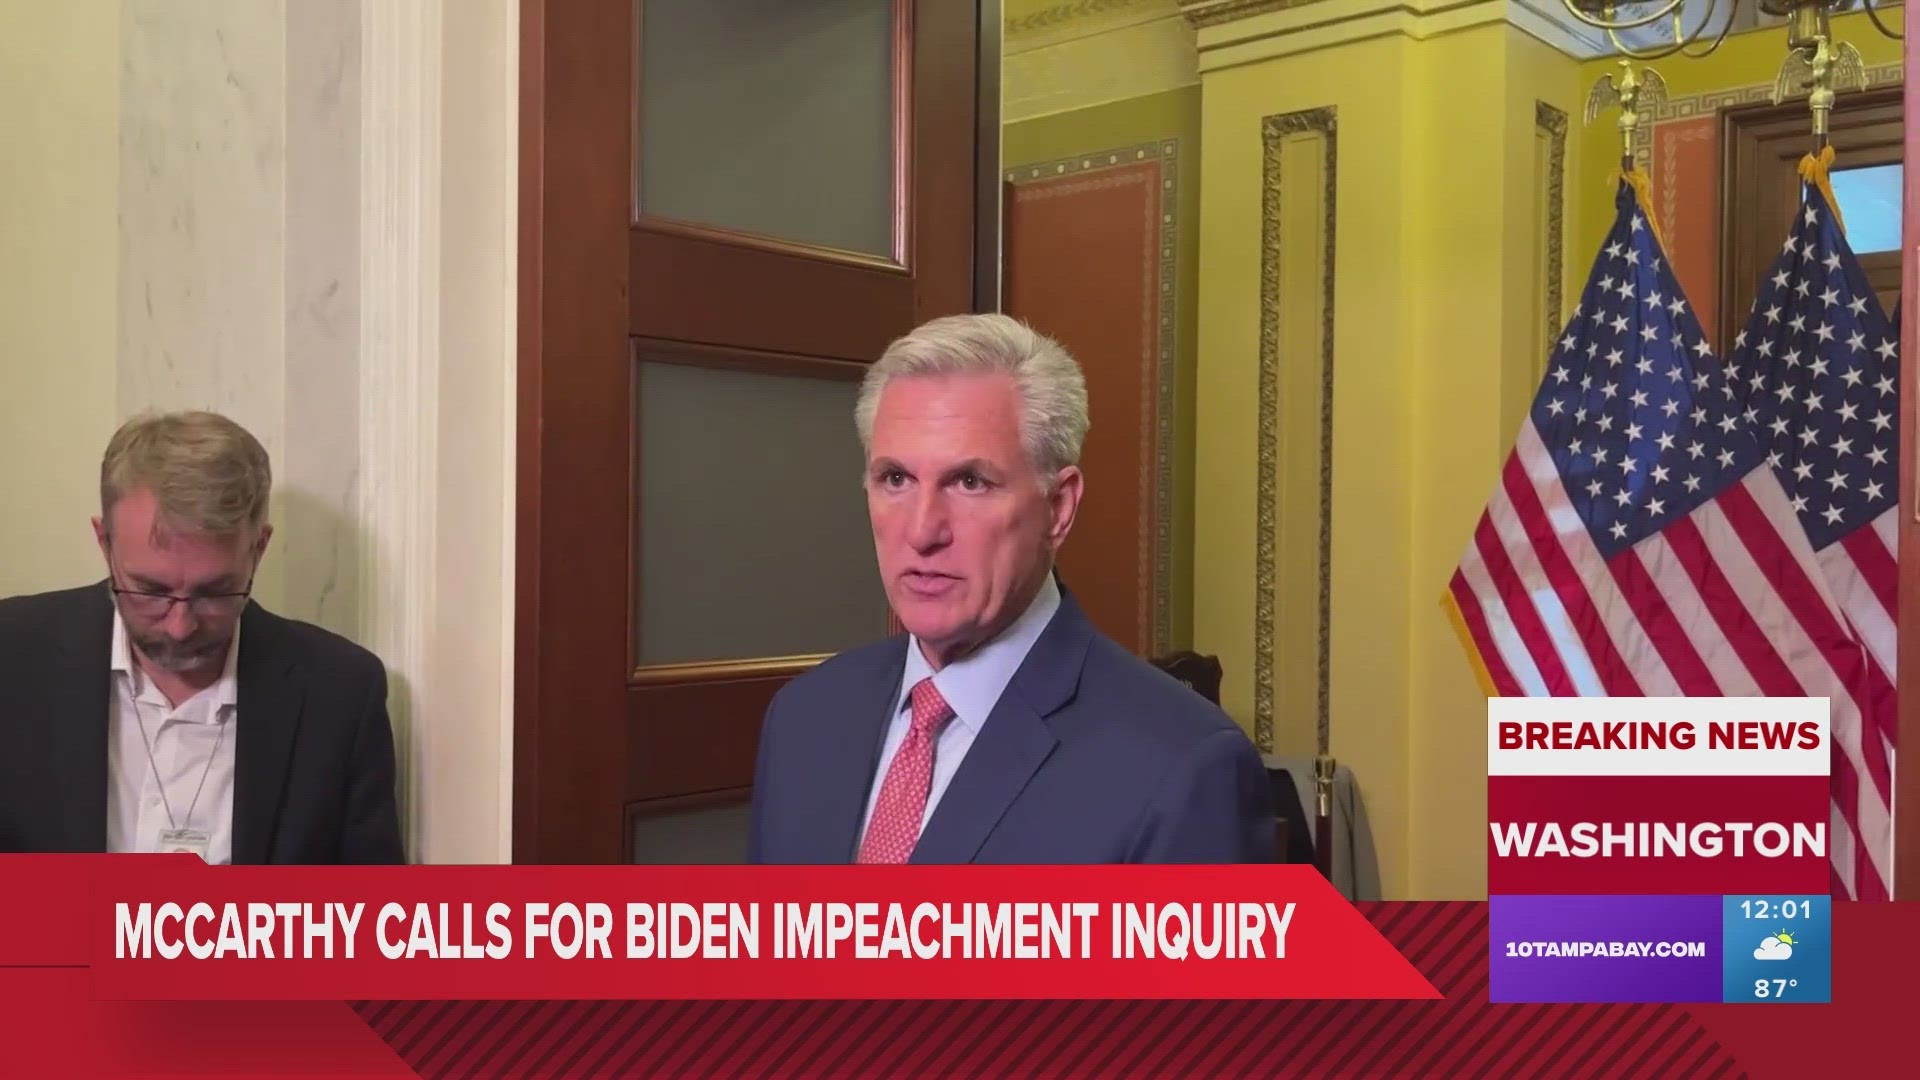 President Biden’s White House has dismissed the impeachment push as politically motivated.